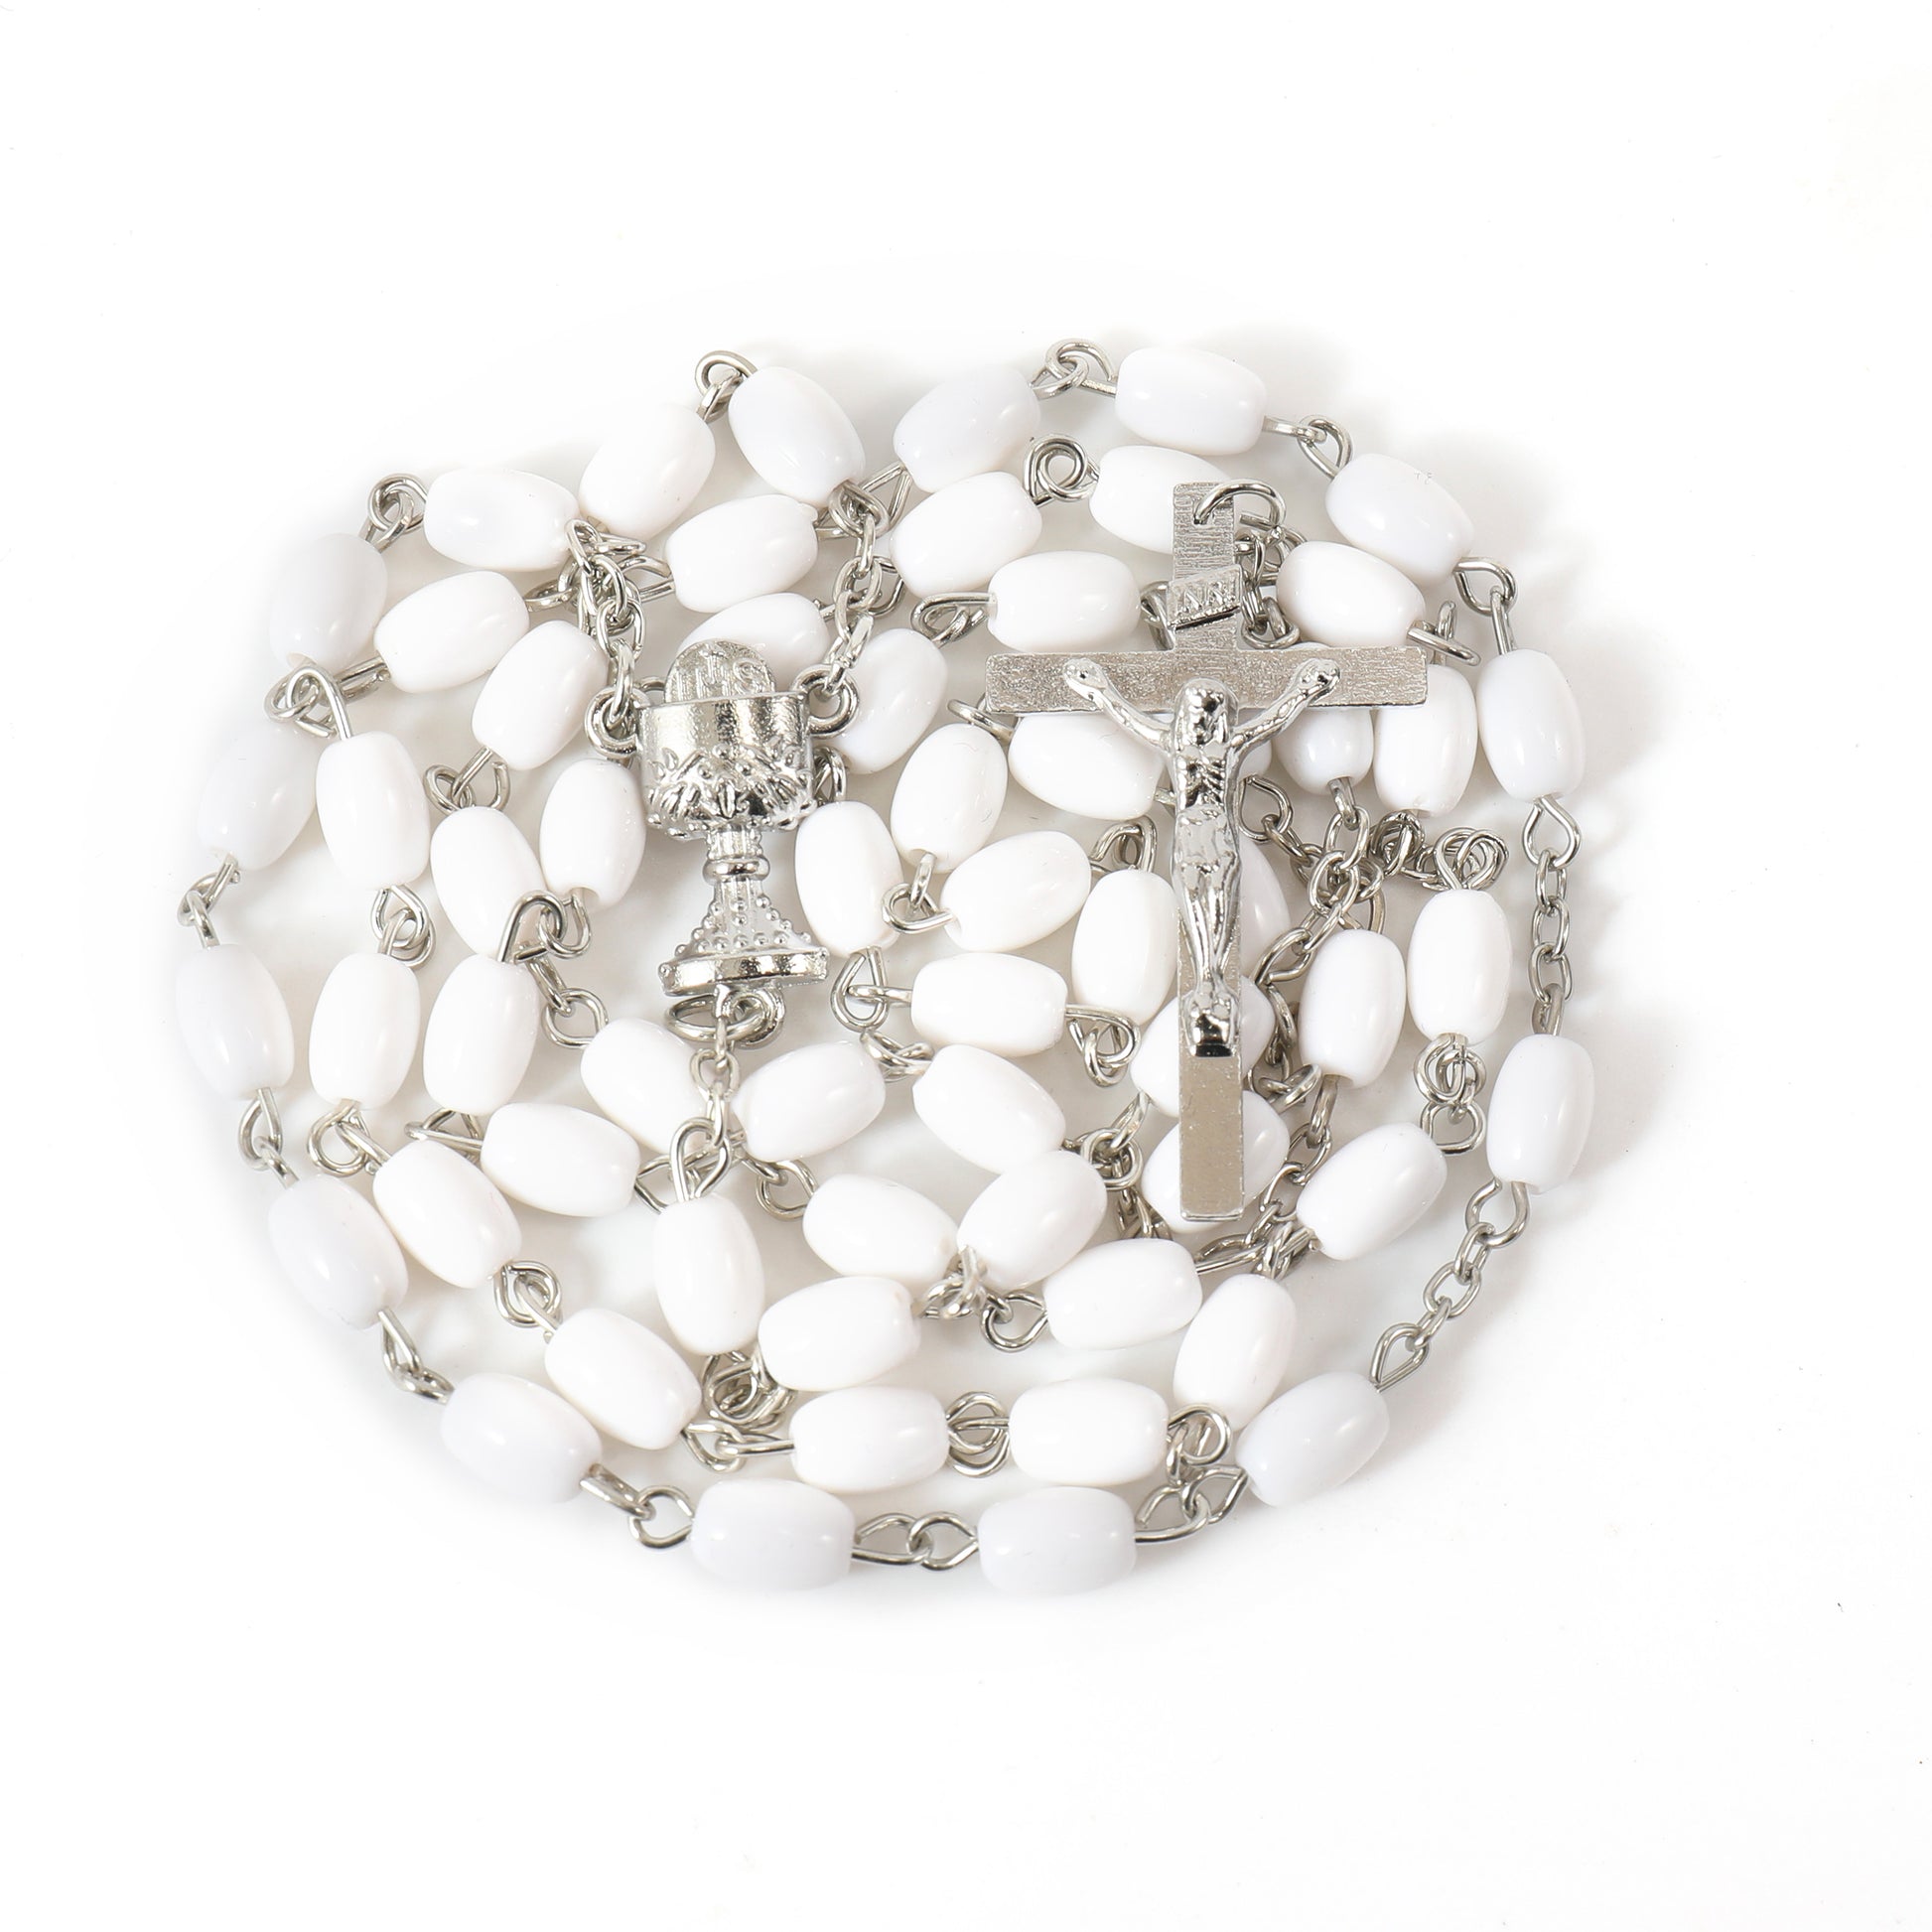 Silver and White Rosary with Cross - Rivendell Shop